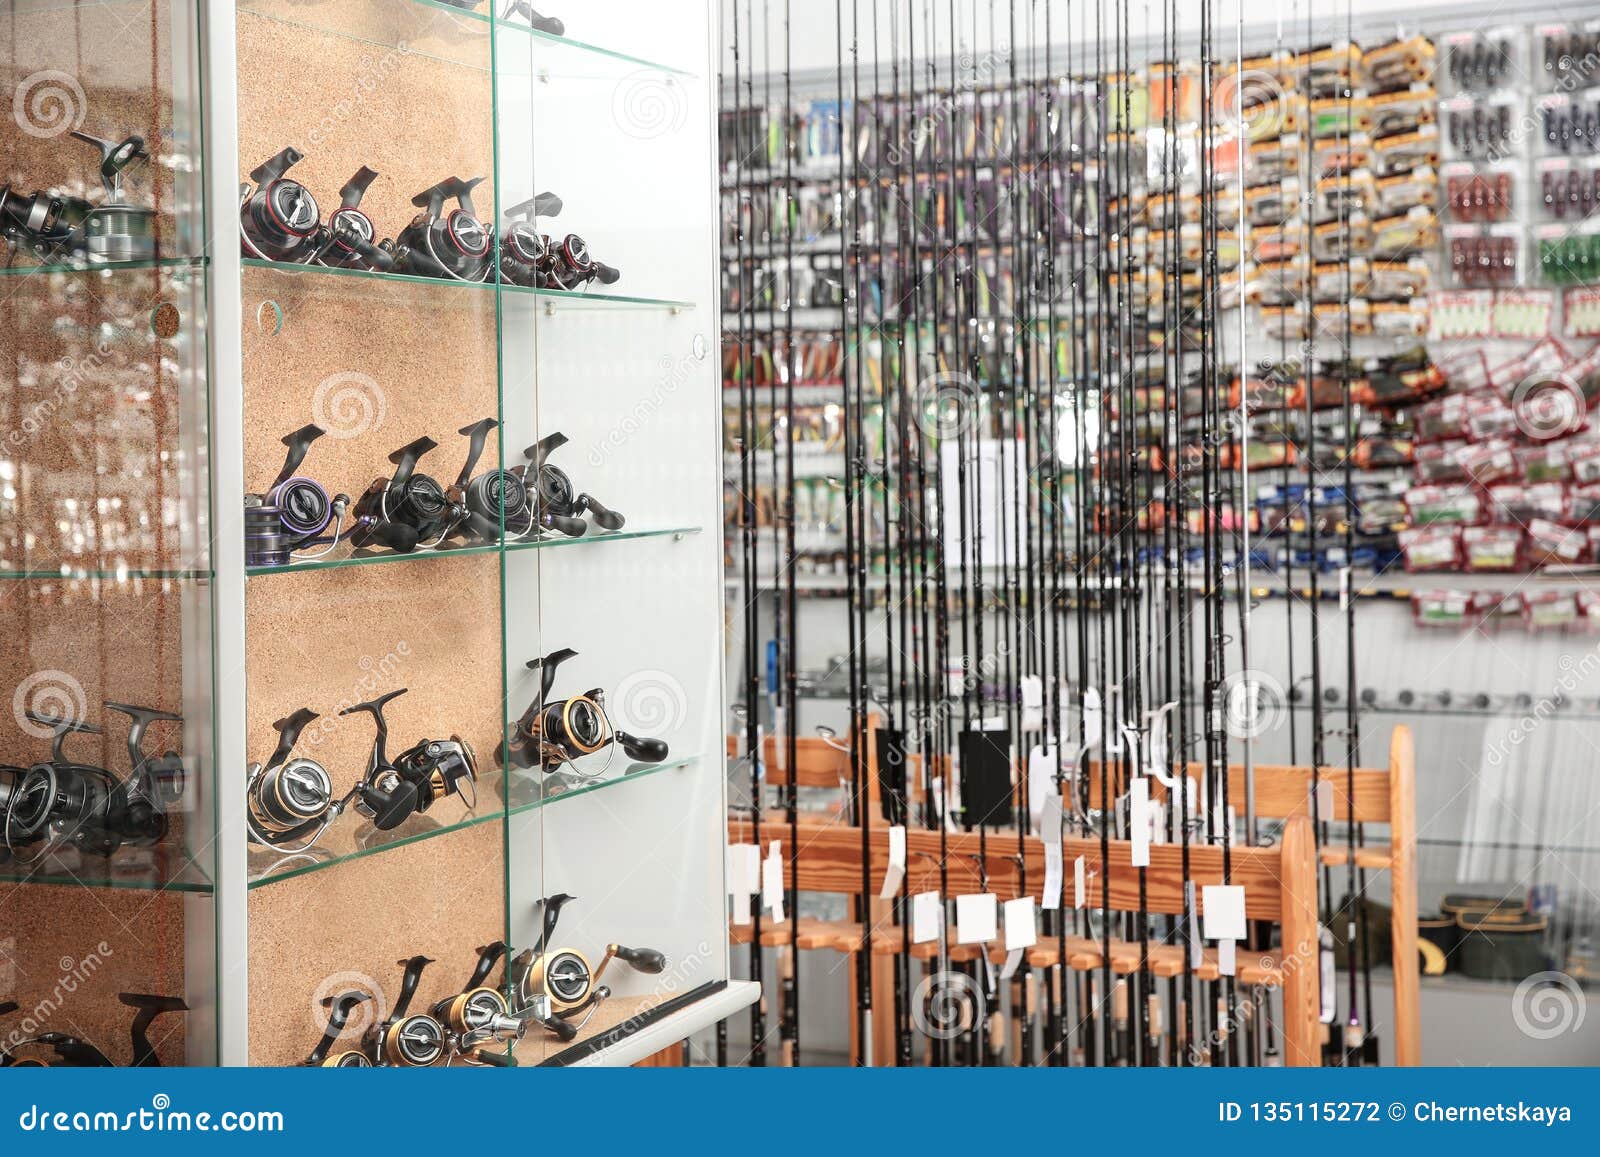 Fishing Equipment in Sports Shop. Stock Photo - Image of offer